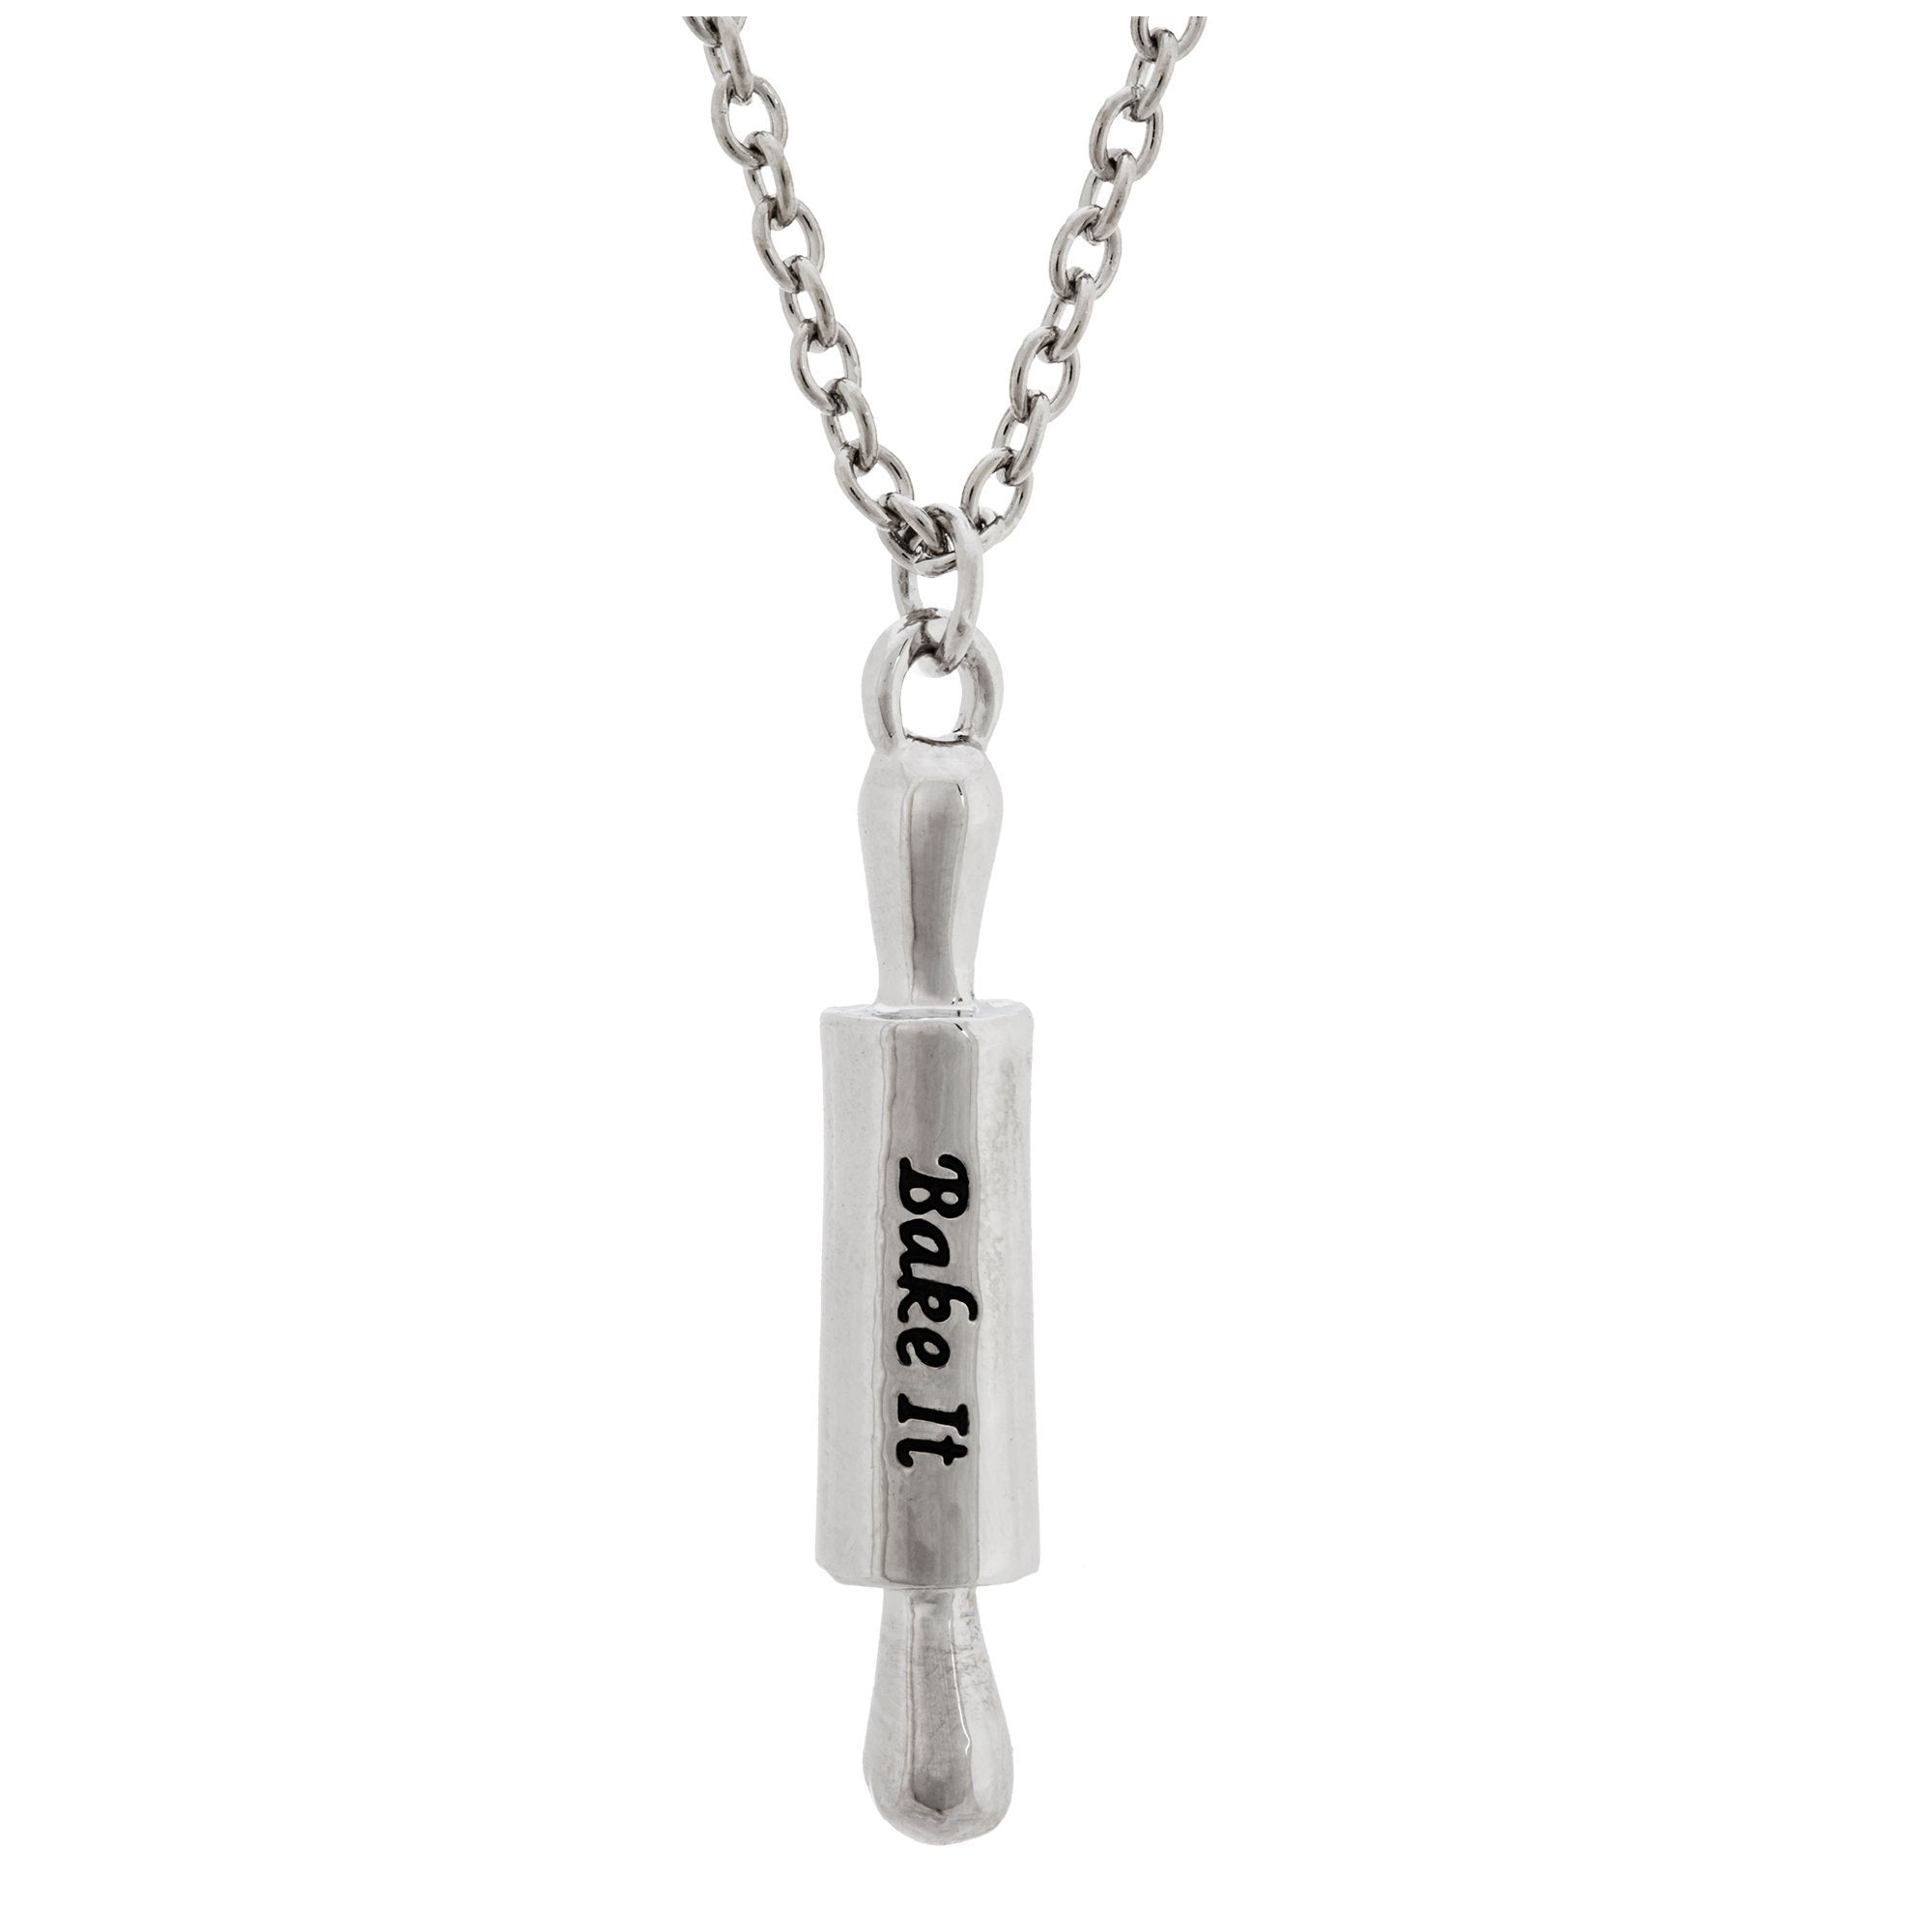 Pewter Rolling Pin Necklace - Single